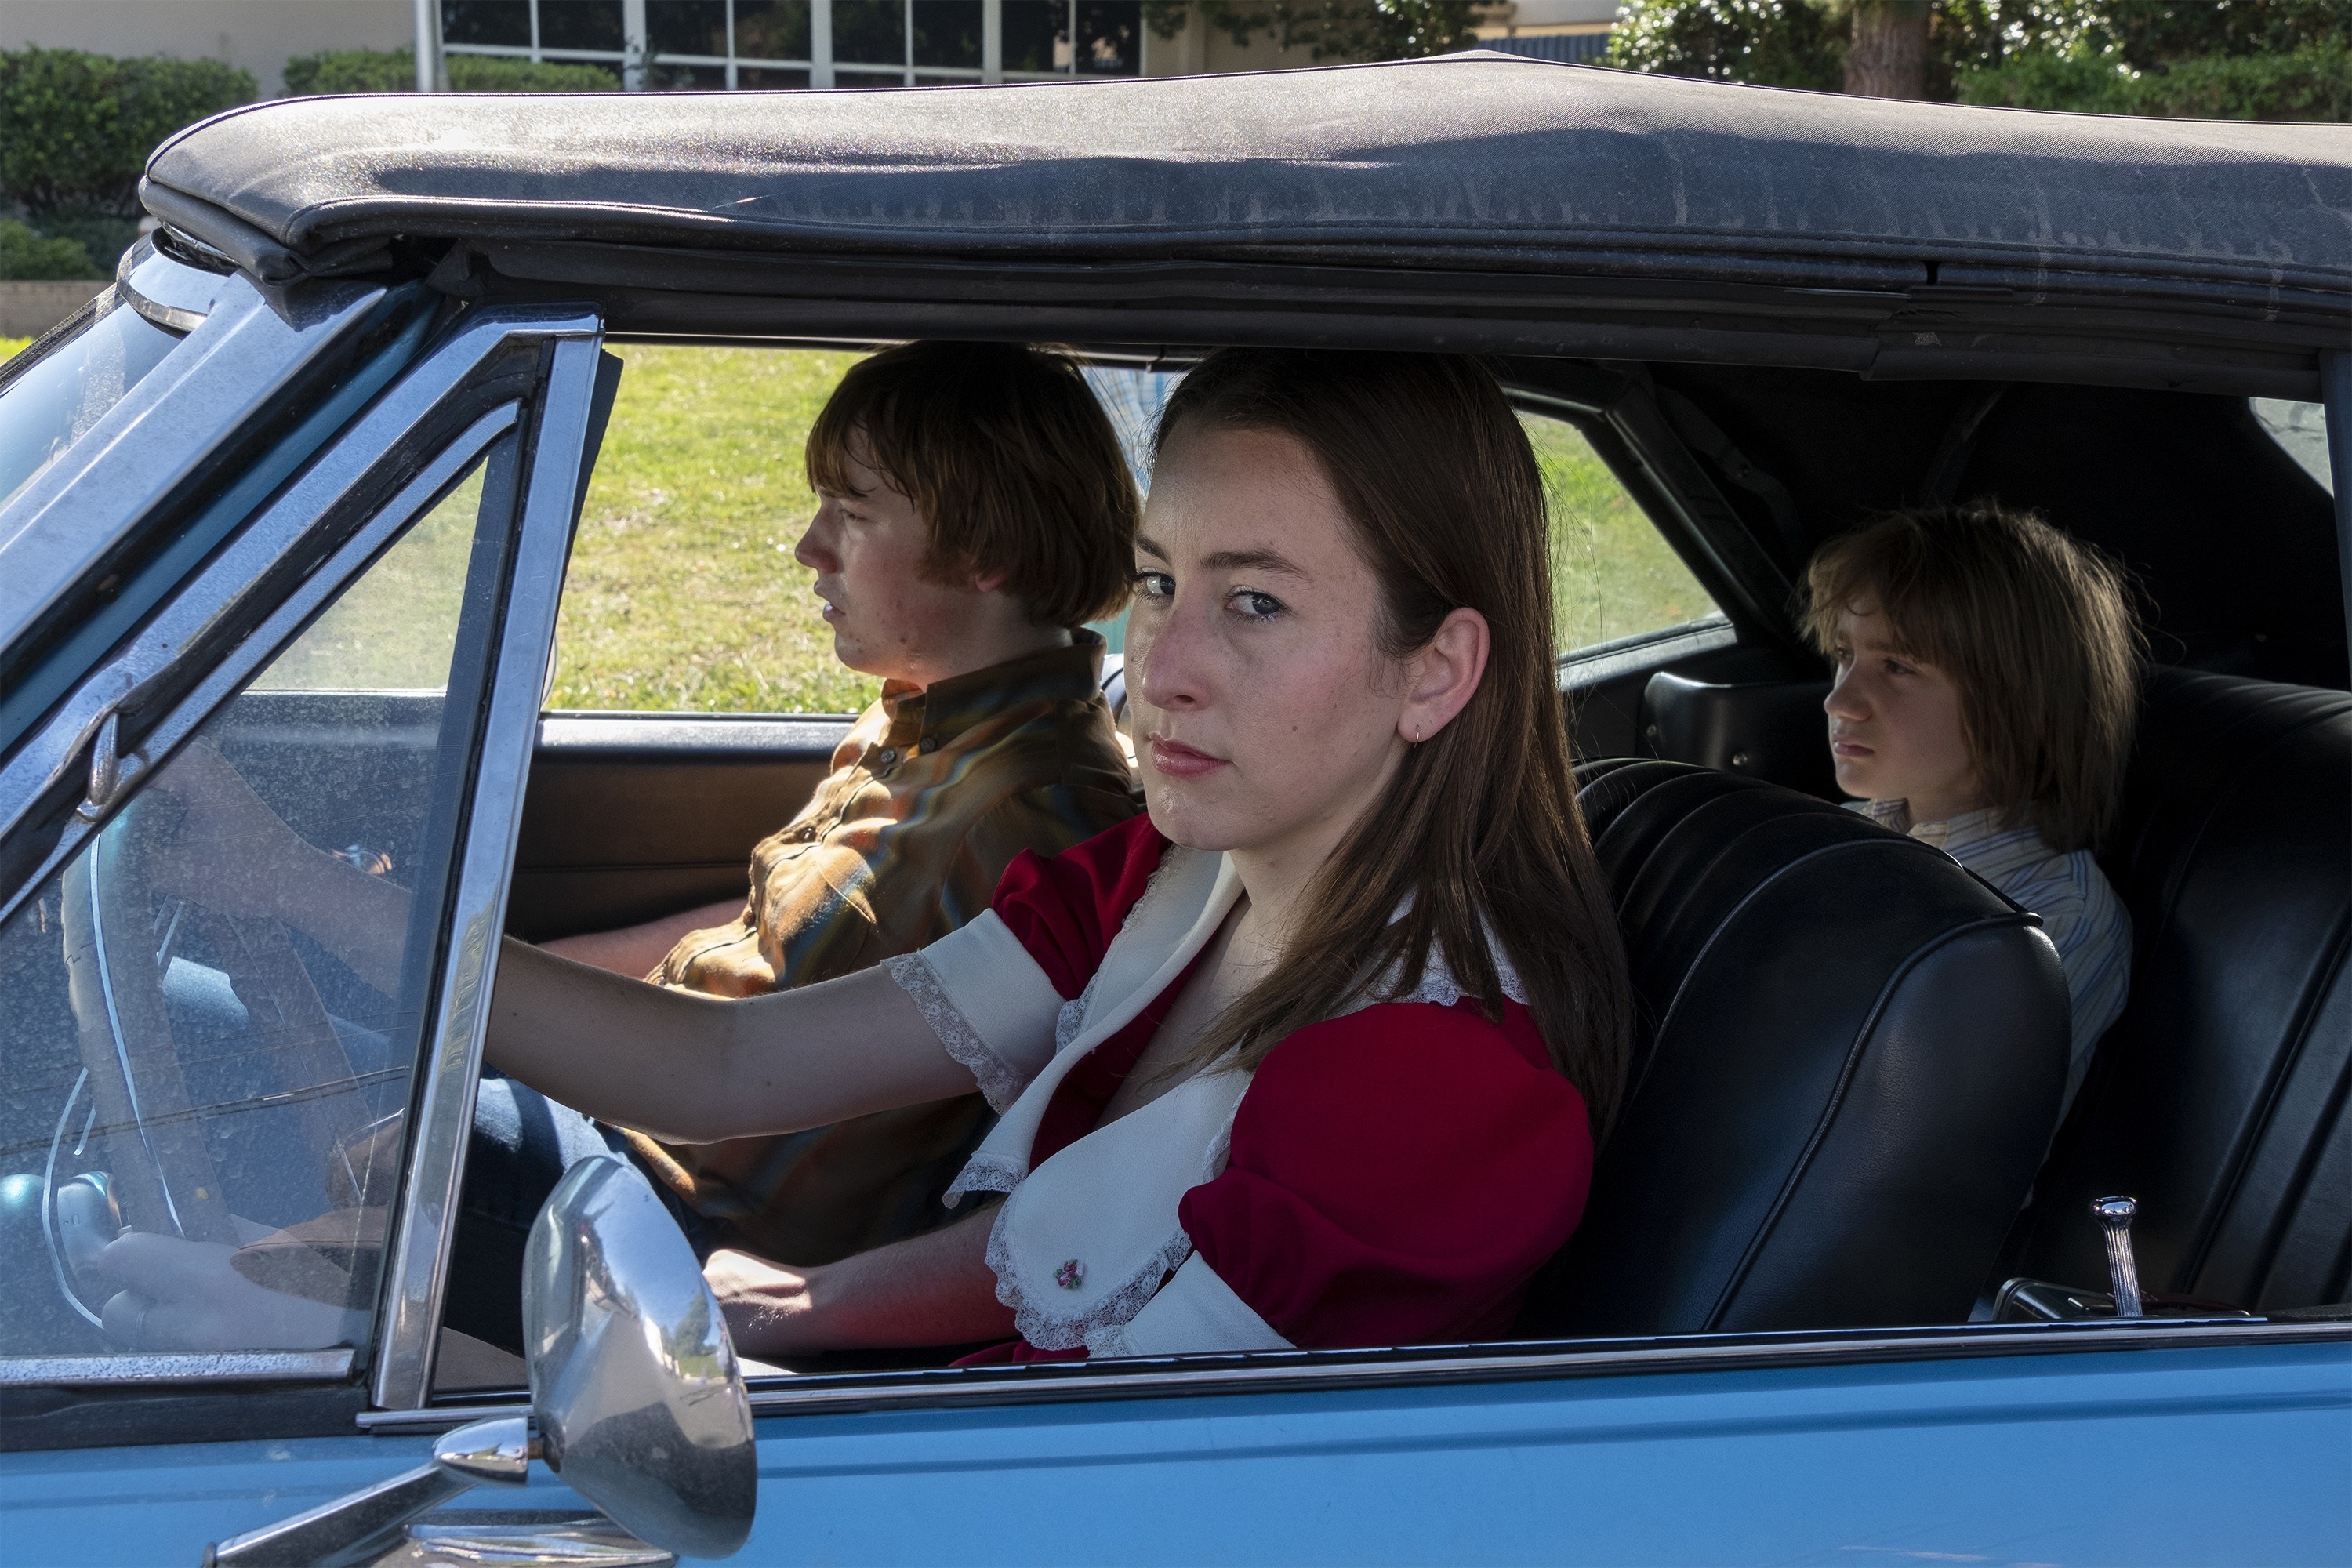 Alana Haim drives a car with Cooper Hoffman sitting beside her